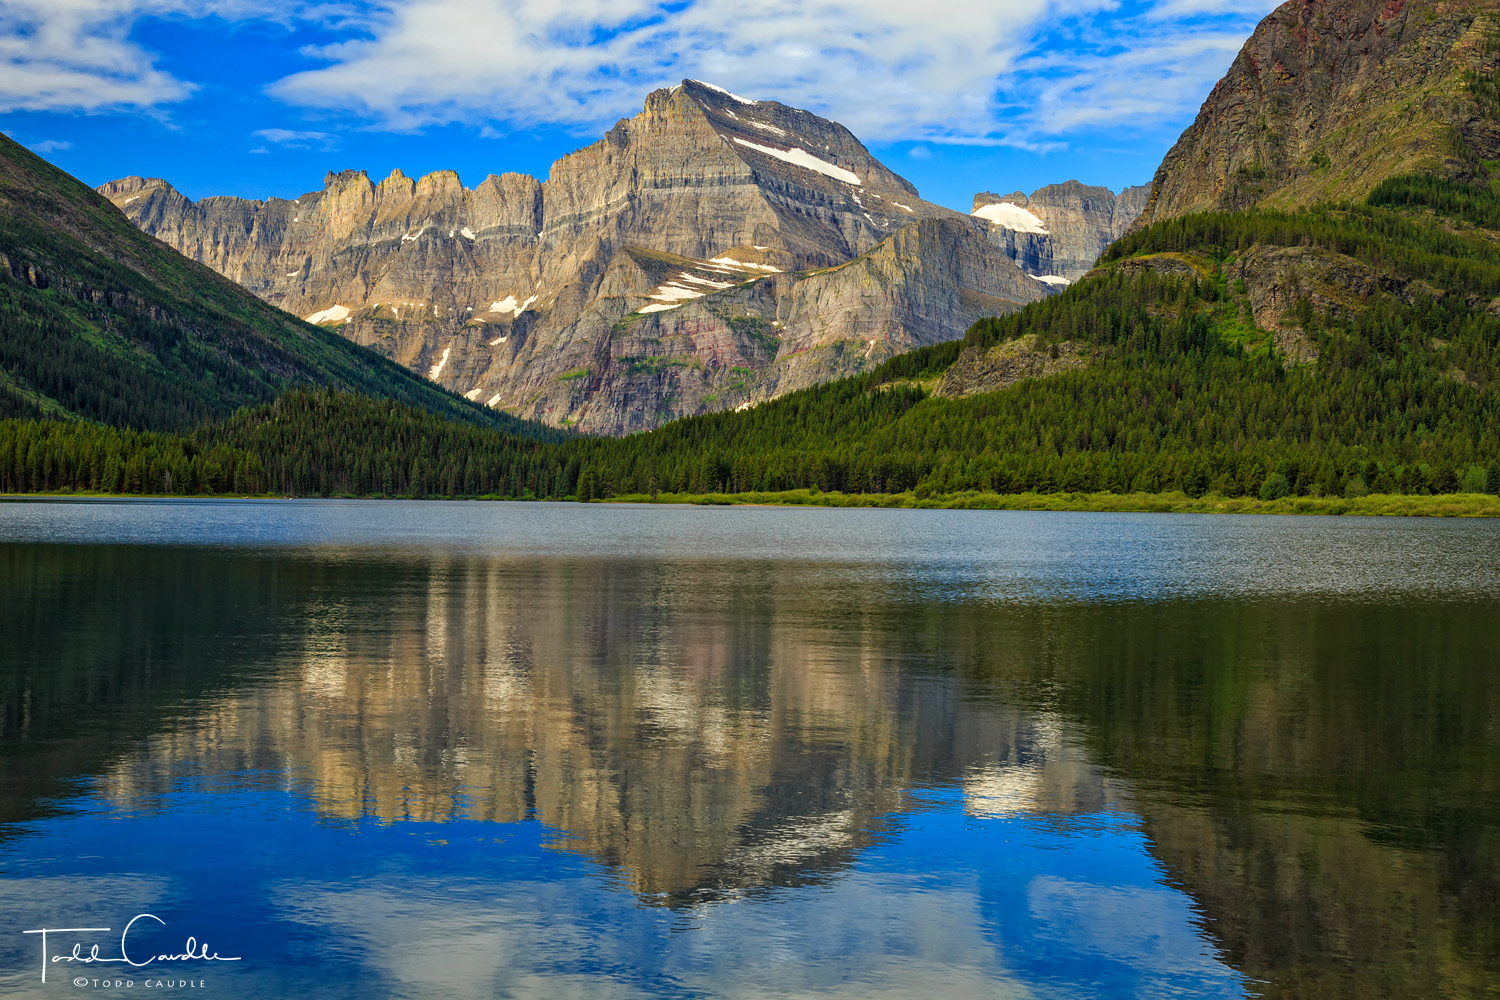 Mount Gould reflects in the still waters of Swiftcurrent Lake in the Many Glaciers region of the park.